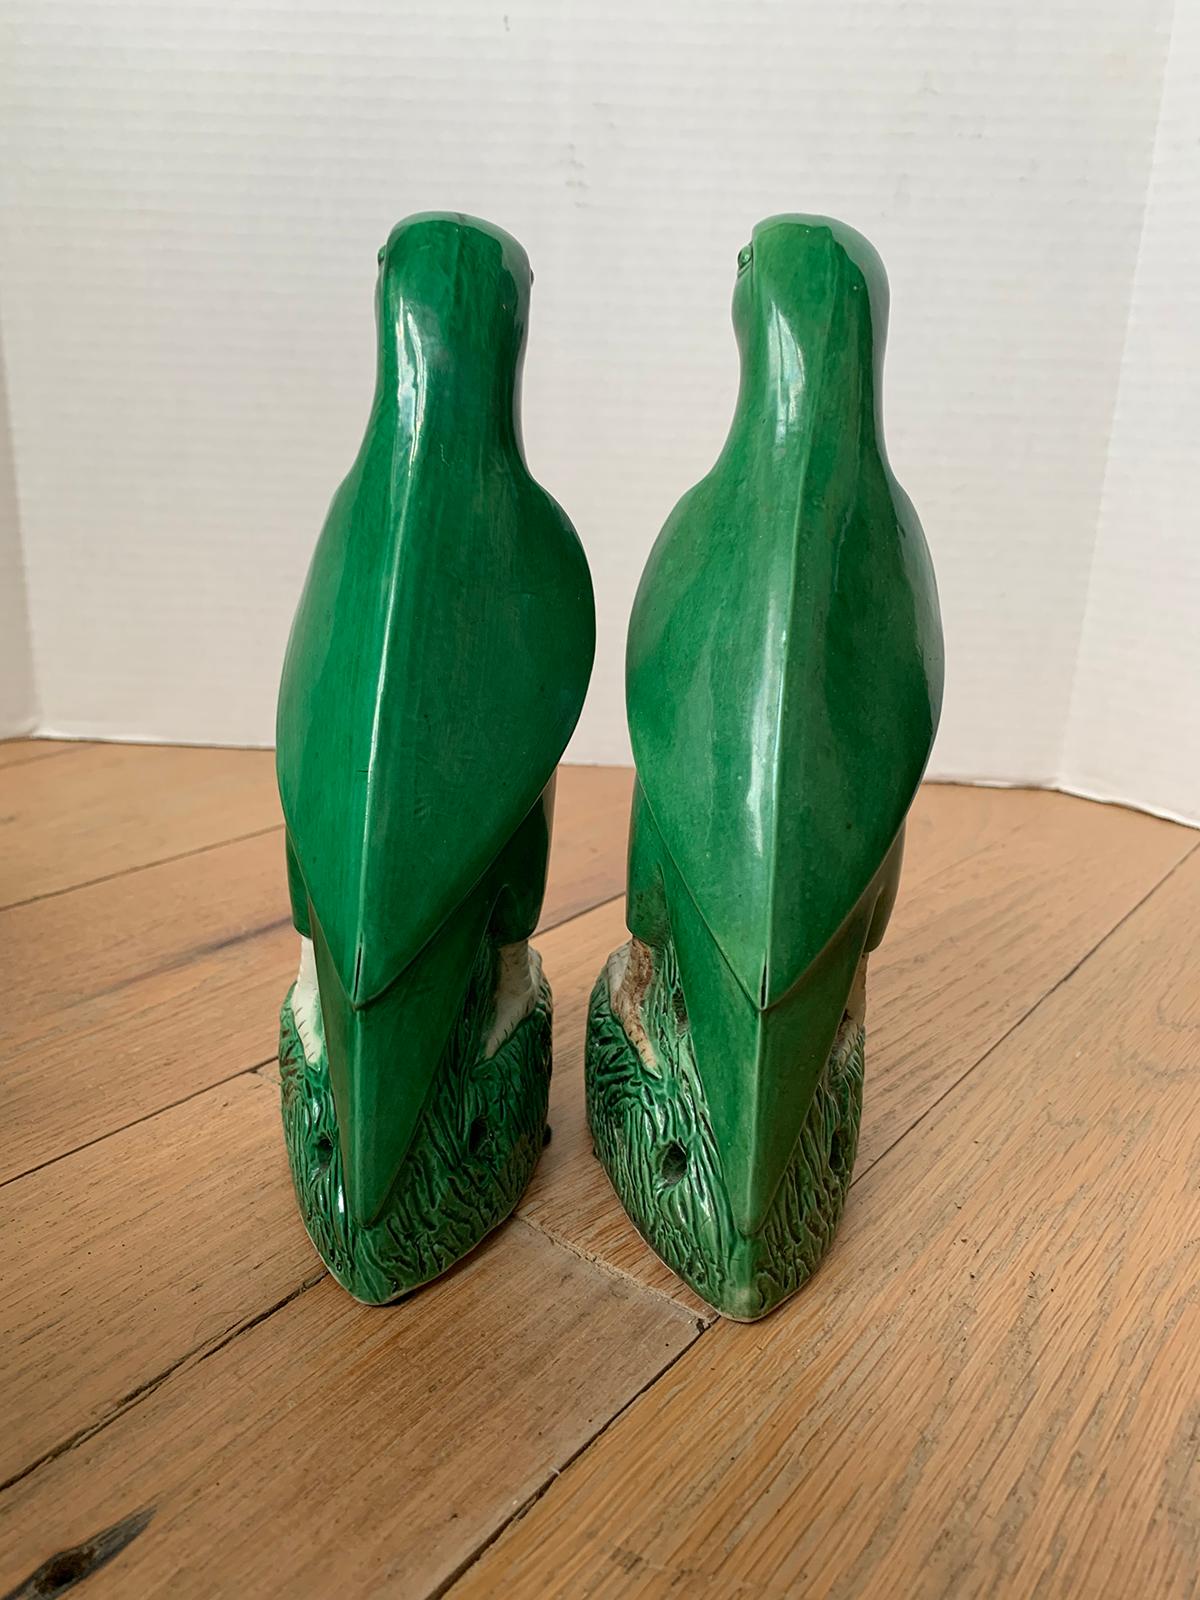 Pair of 19th Century Chinese Export Green Glazed Porcelain Parrots, Unmarked For Sale 2